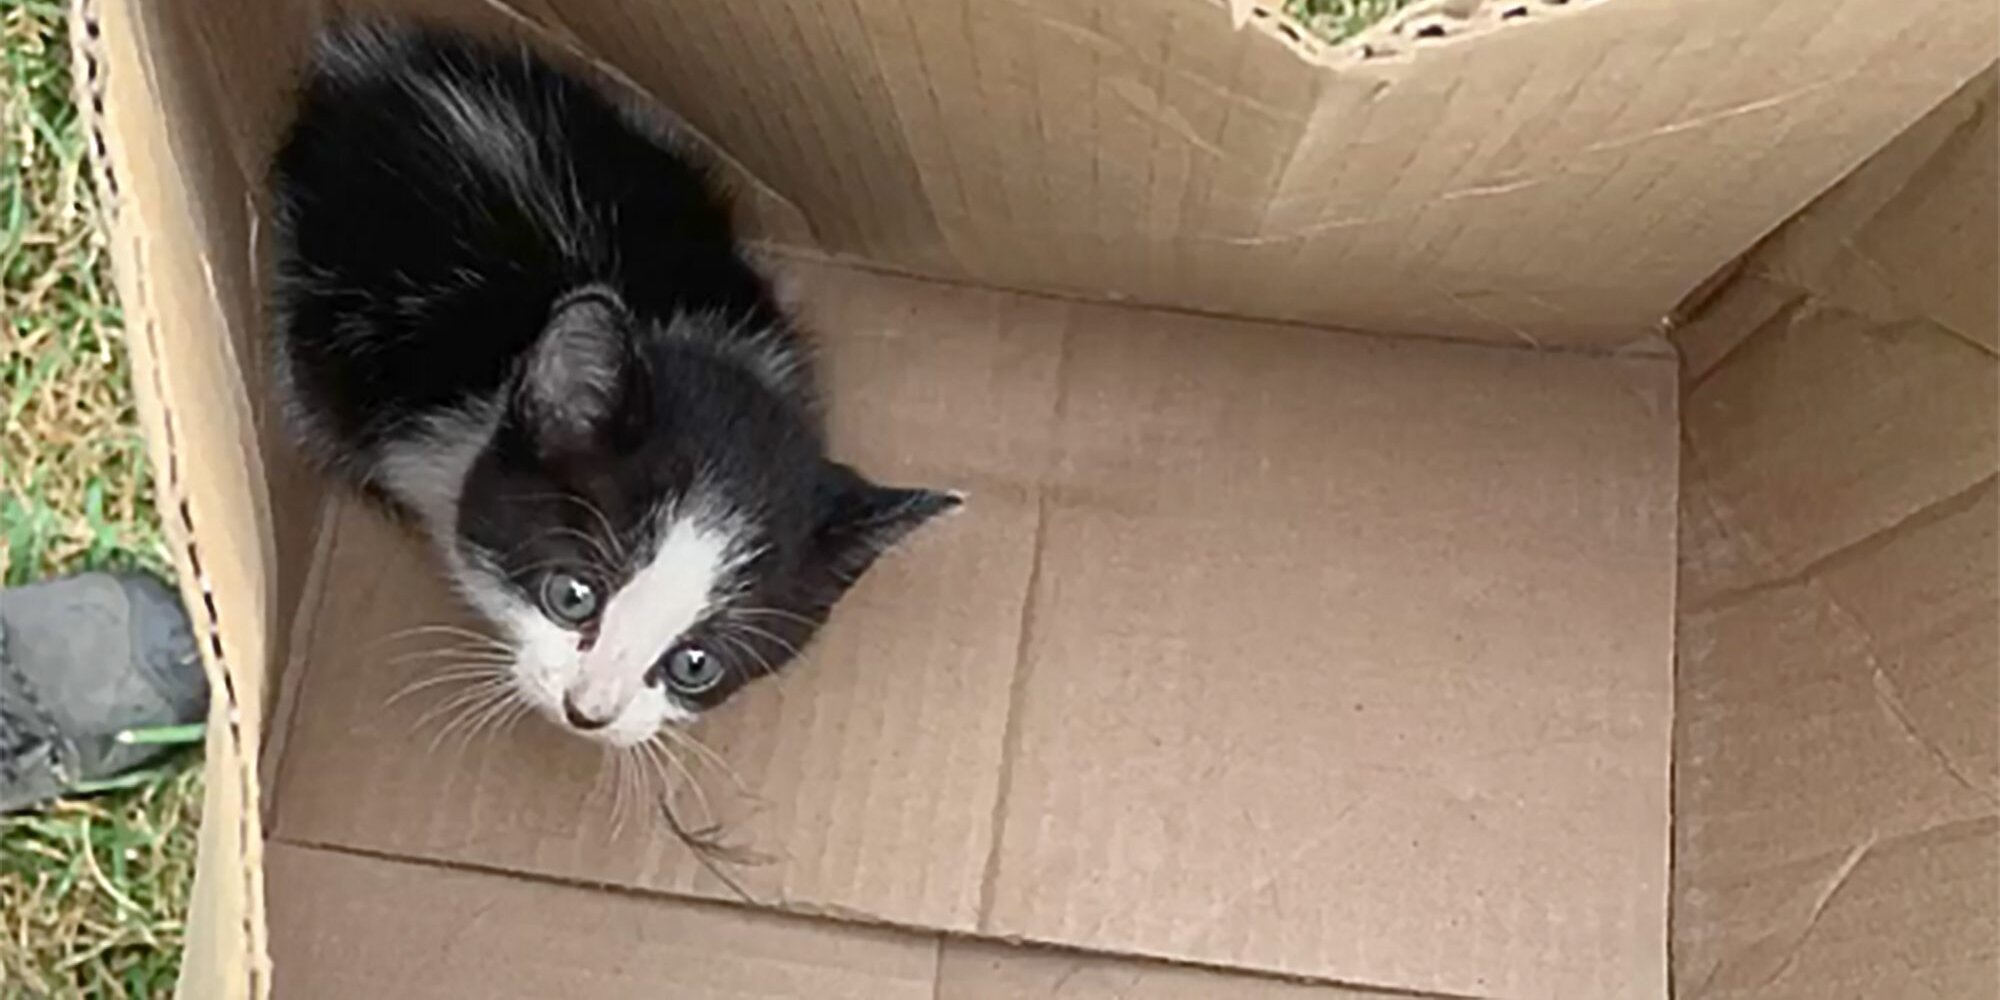 Cat after rescue